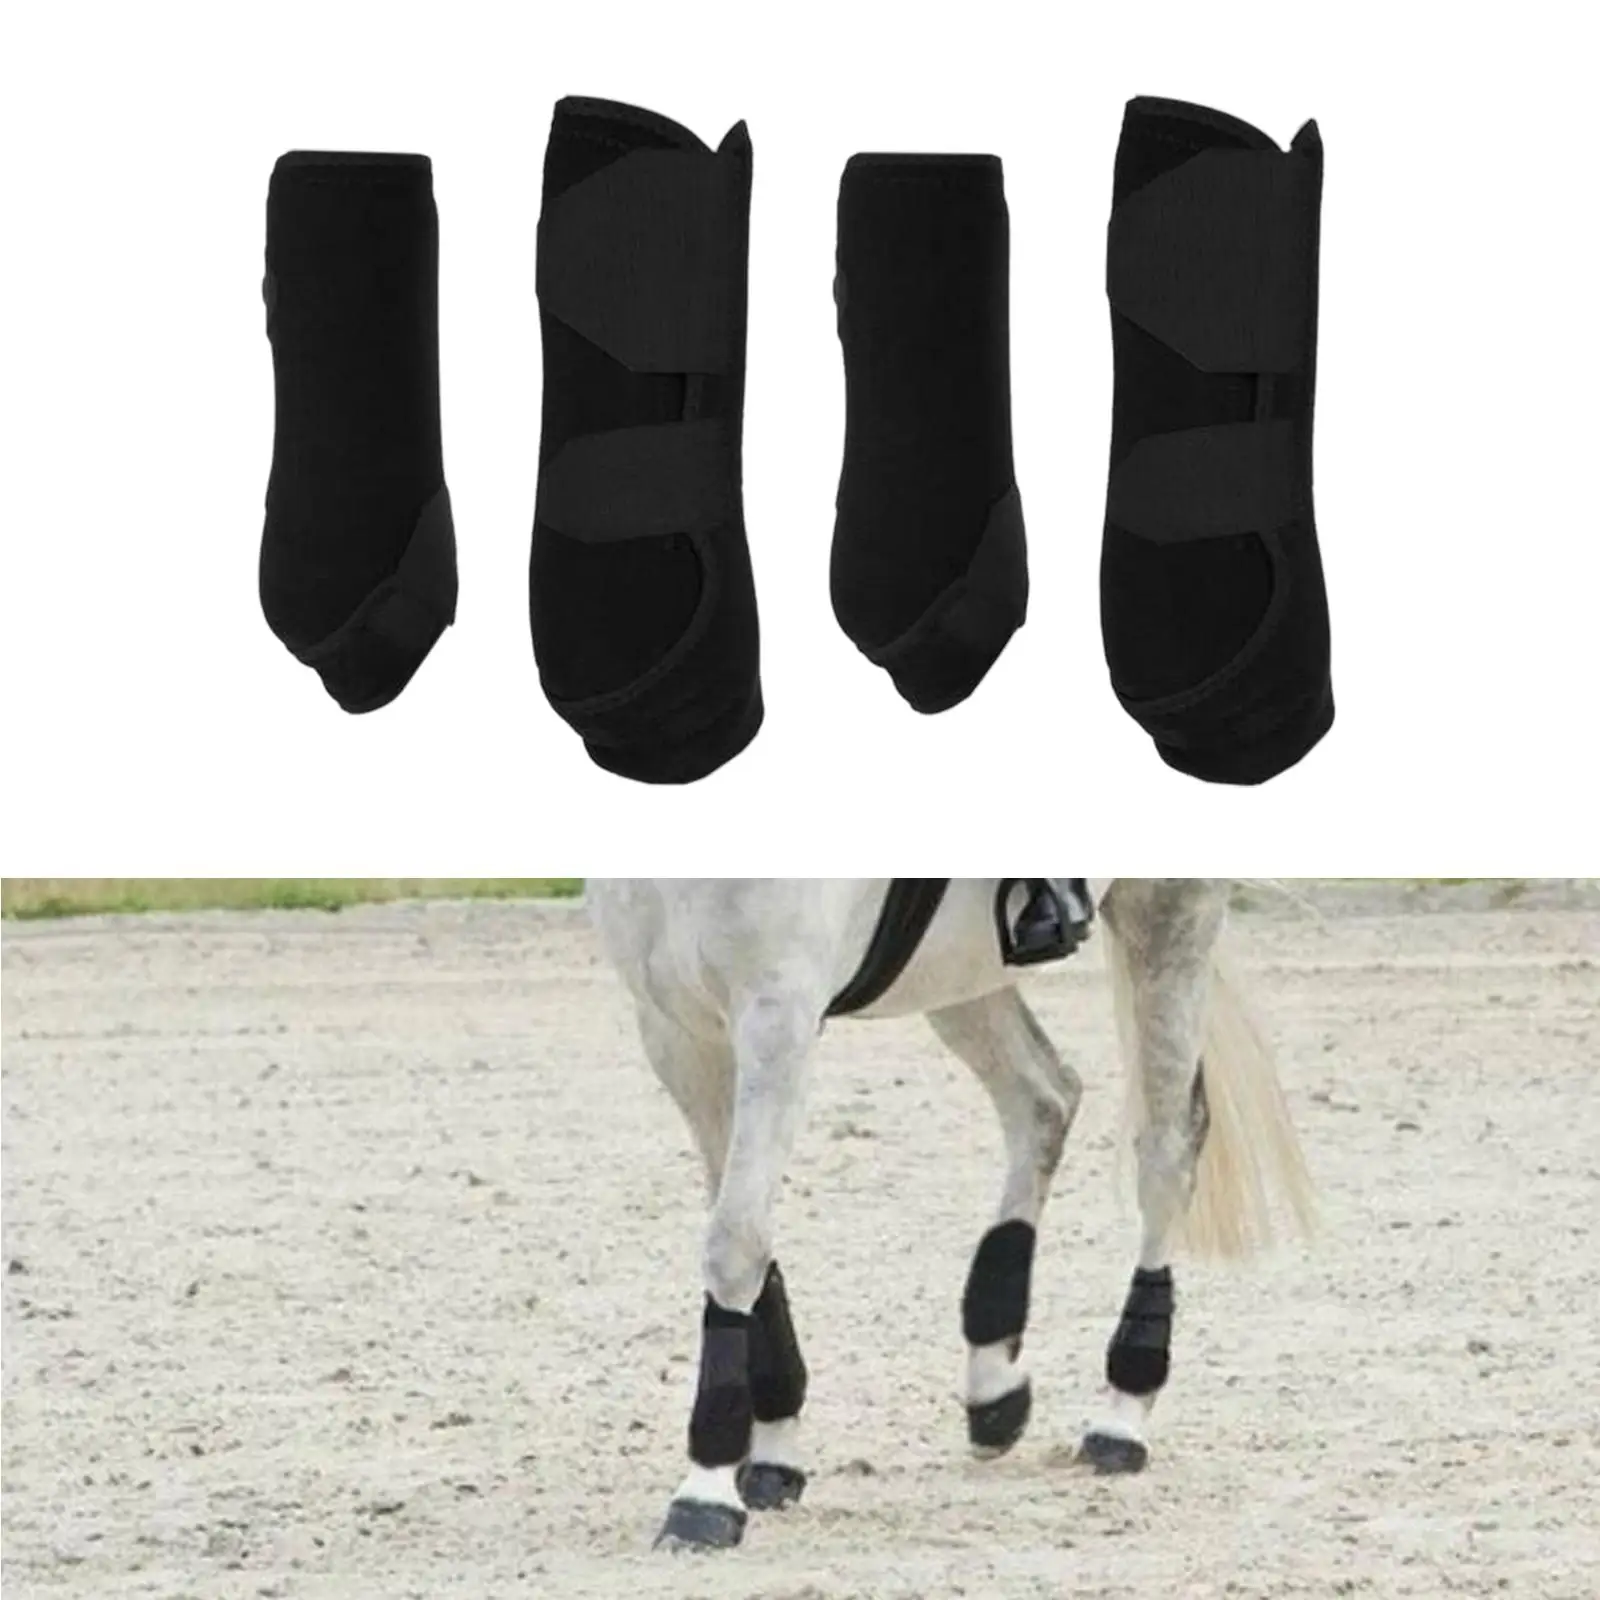 4x Neoprene Horse Boots Leg Wraps Shock Absorbing Tendon Protection Guard for